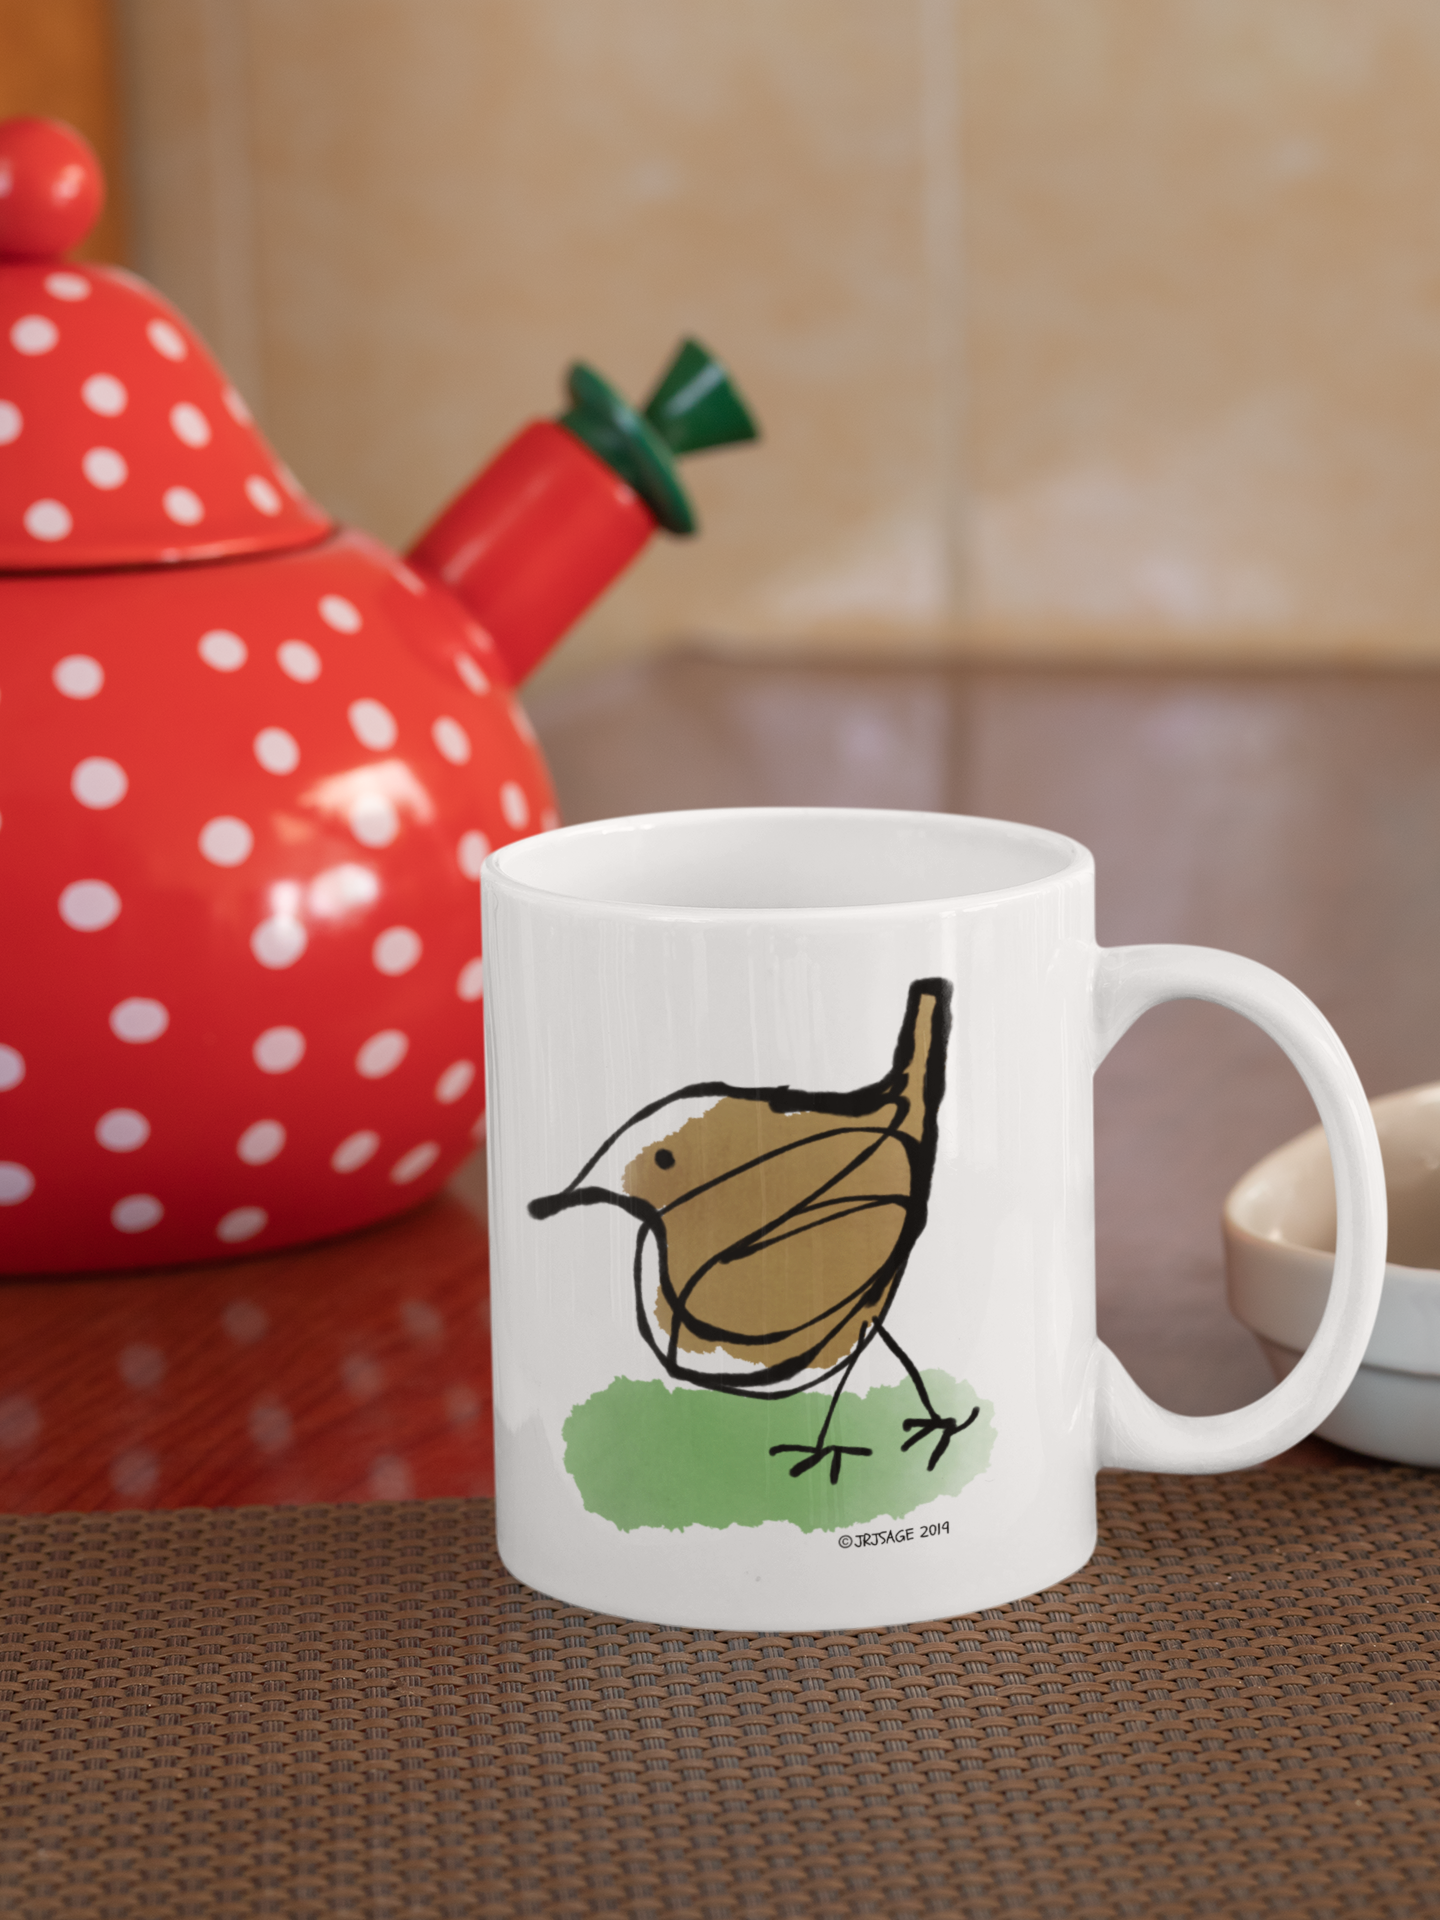 A Jenny Wren bird cute hand drawn illustrated design by Hector and Bone white tea and coffee mug